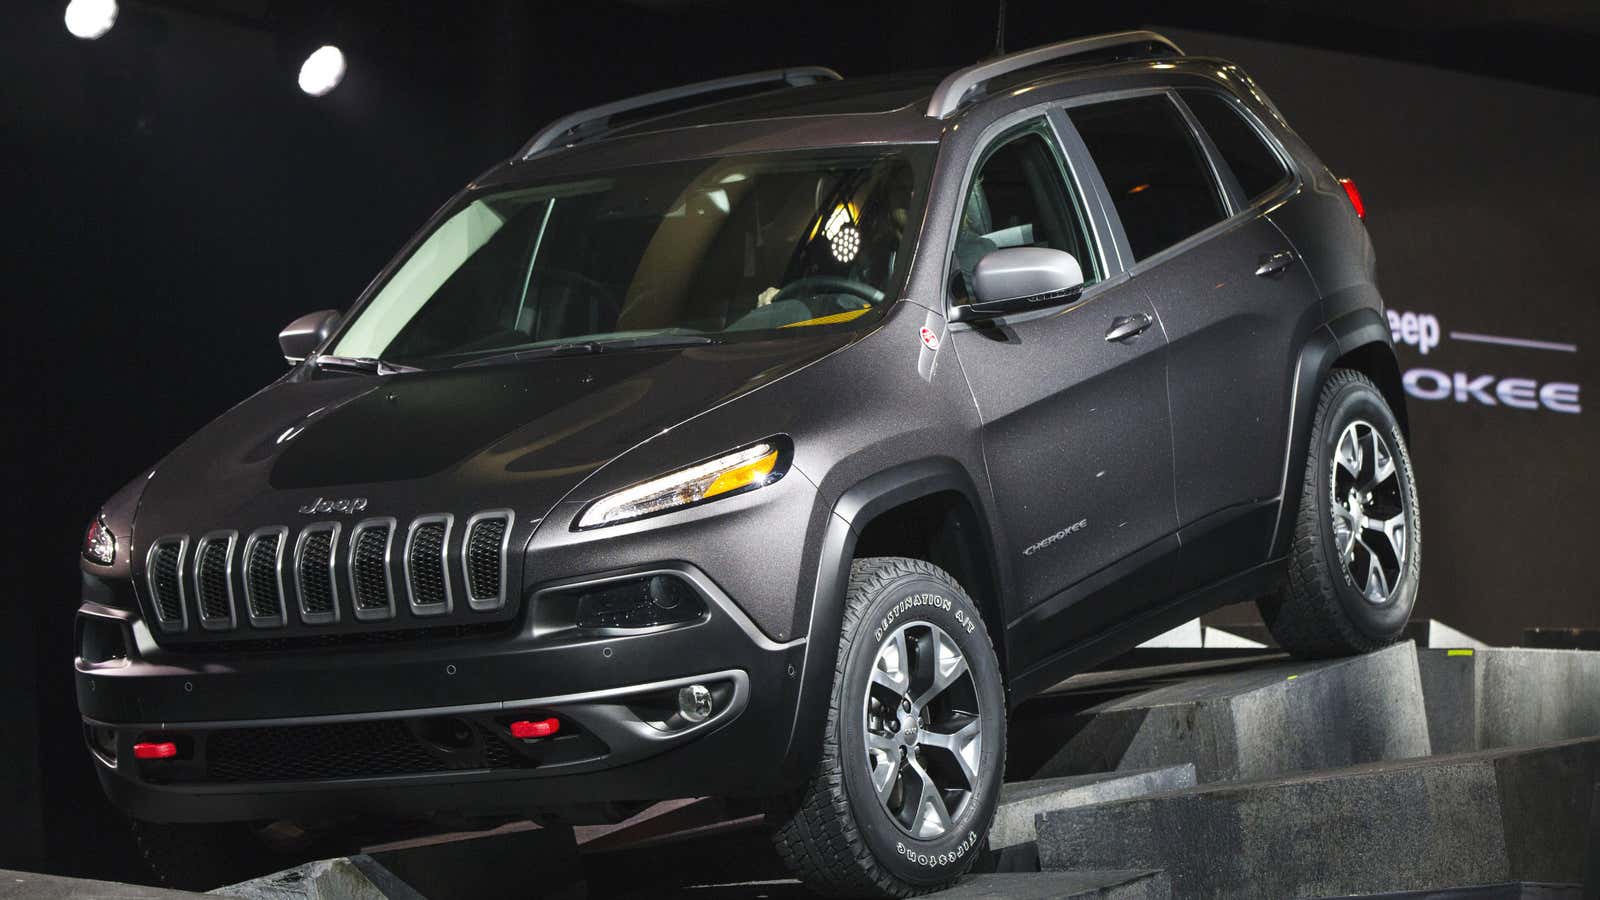 Like this 2014 Jeep, Chryslers’s IPO is a on a rocky road.